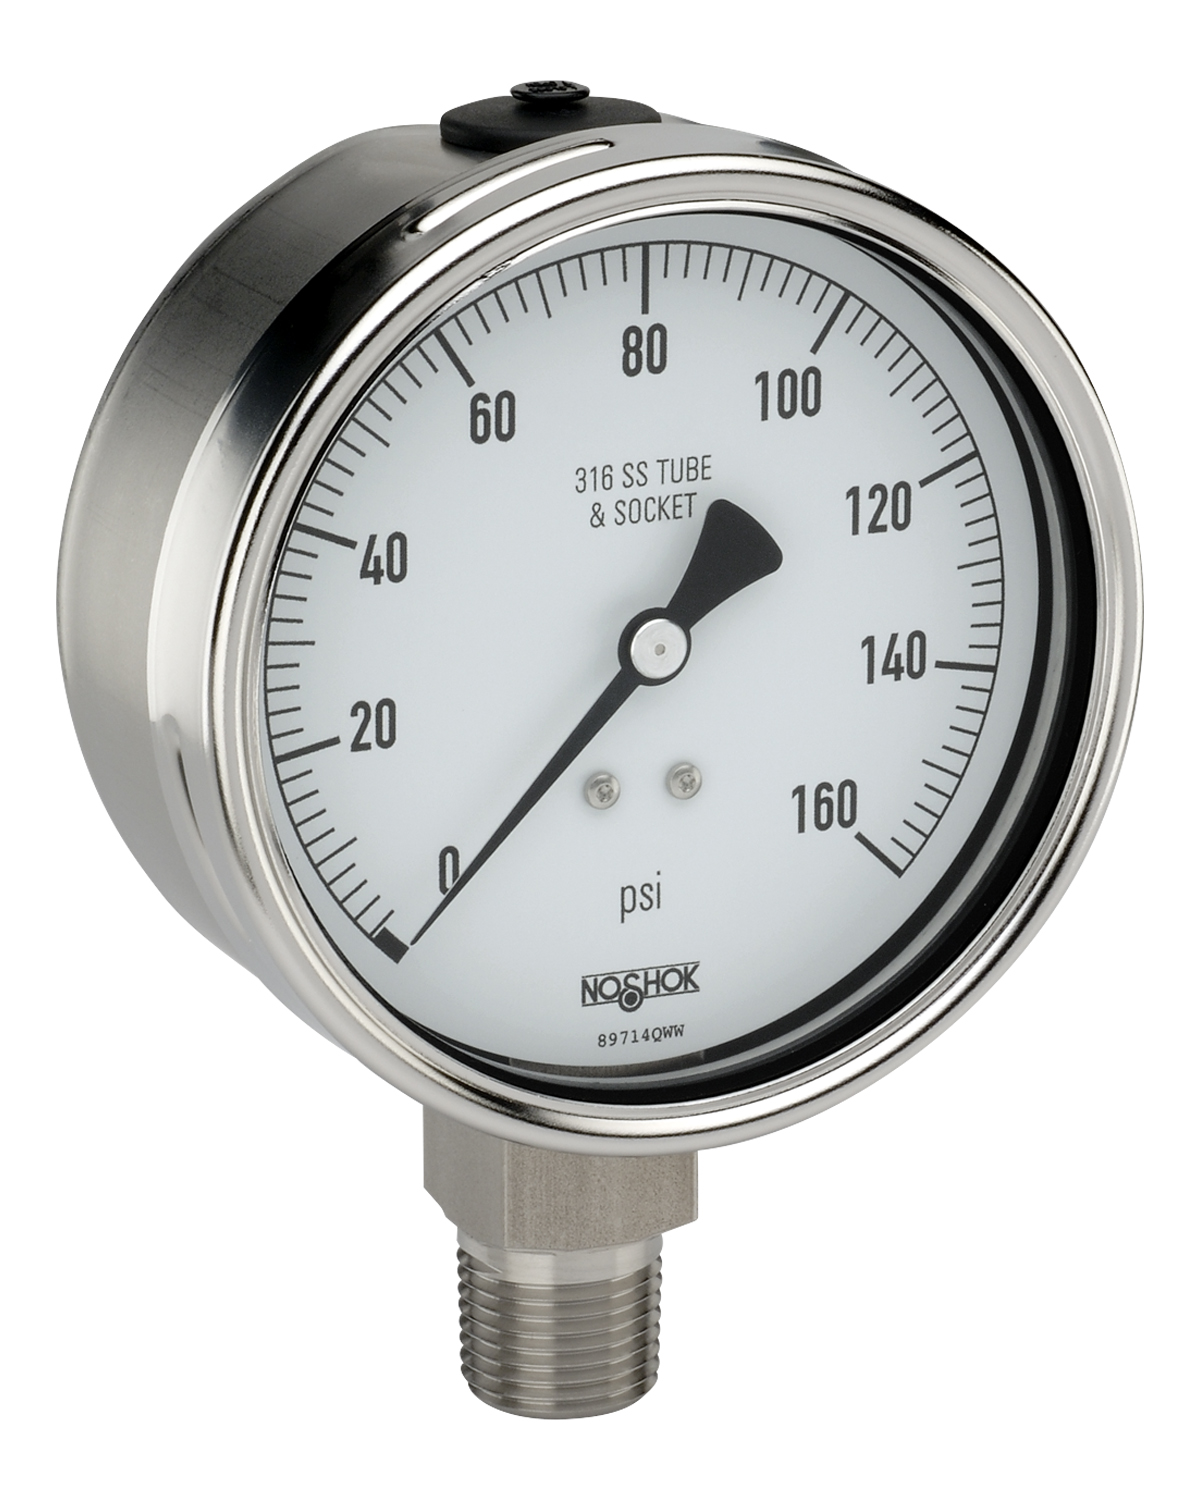 40-500-2000-psi/bar 400/500 Series All Stainless Steel Dry and Liquid Filled Pressure Gauges